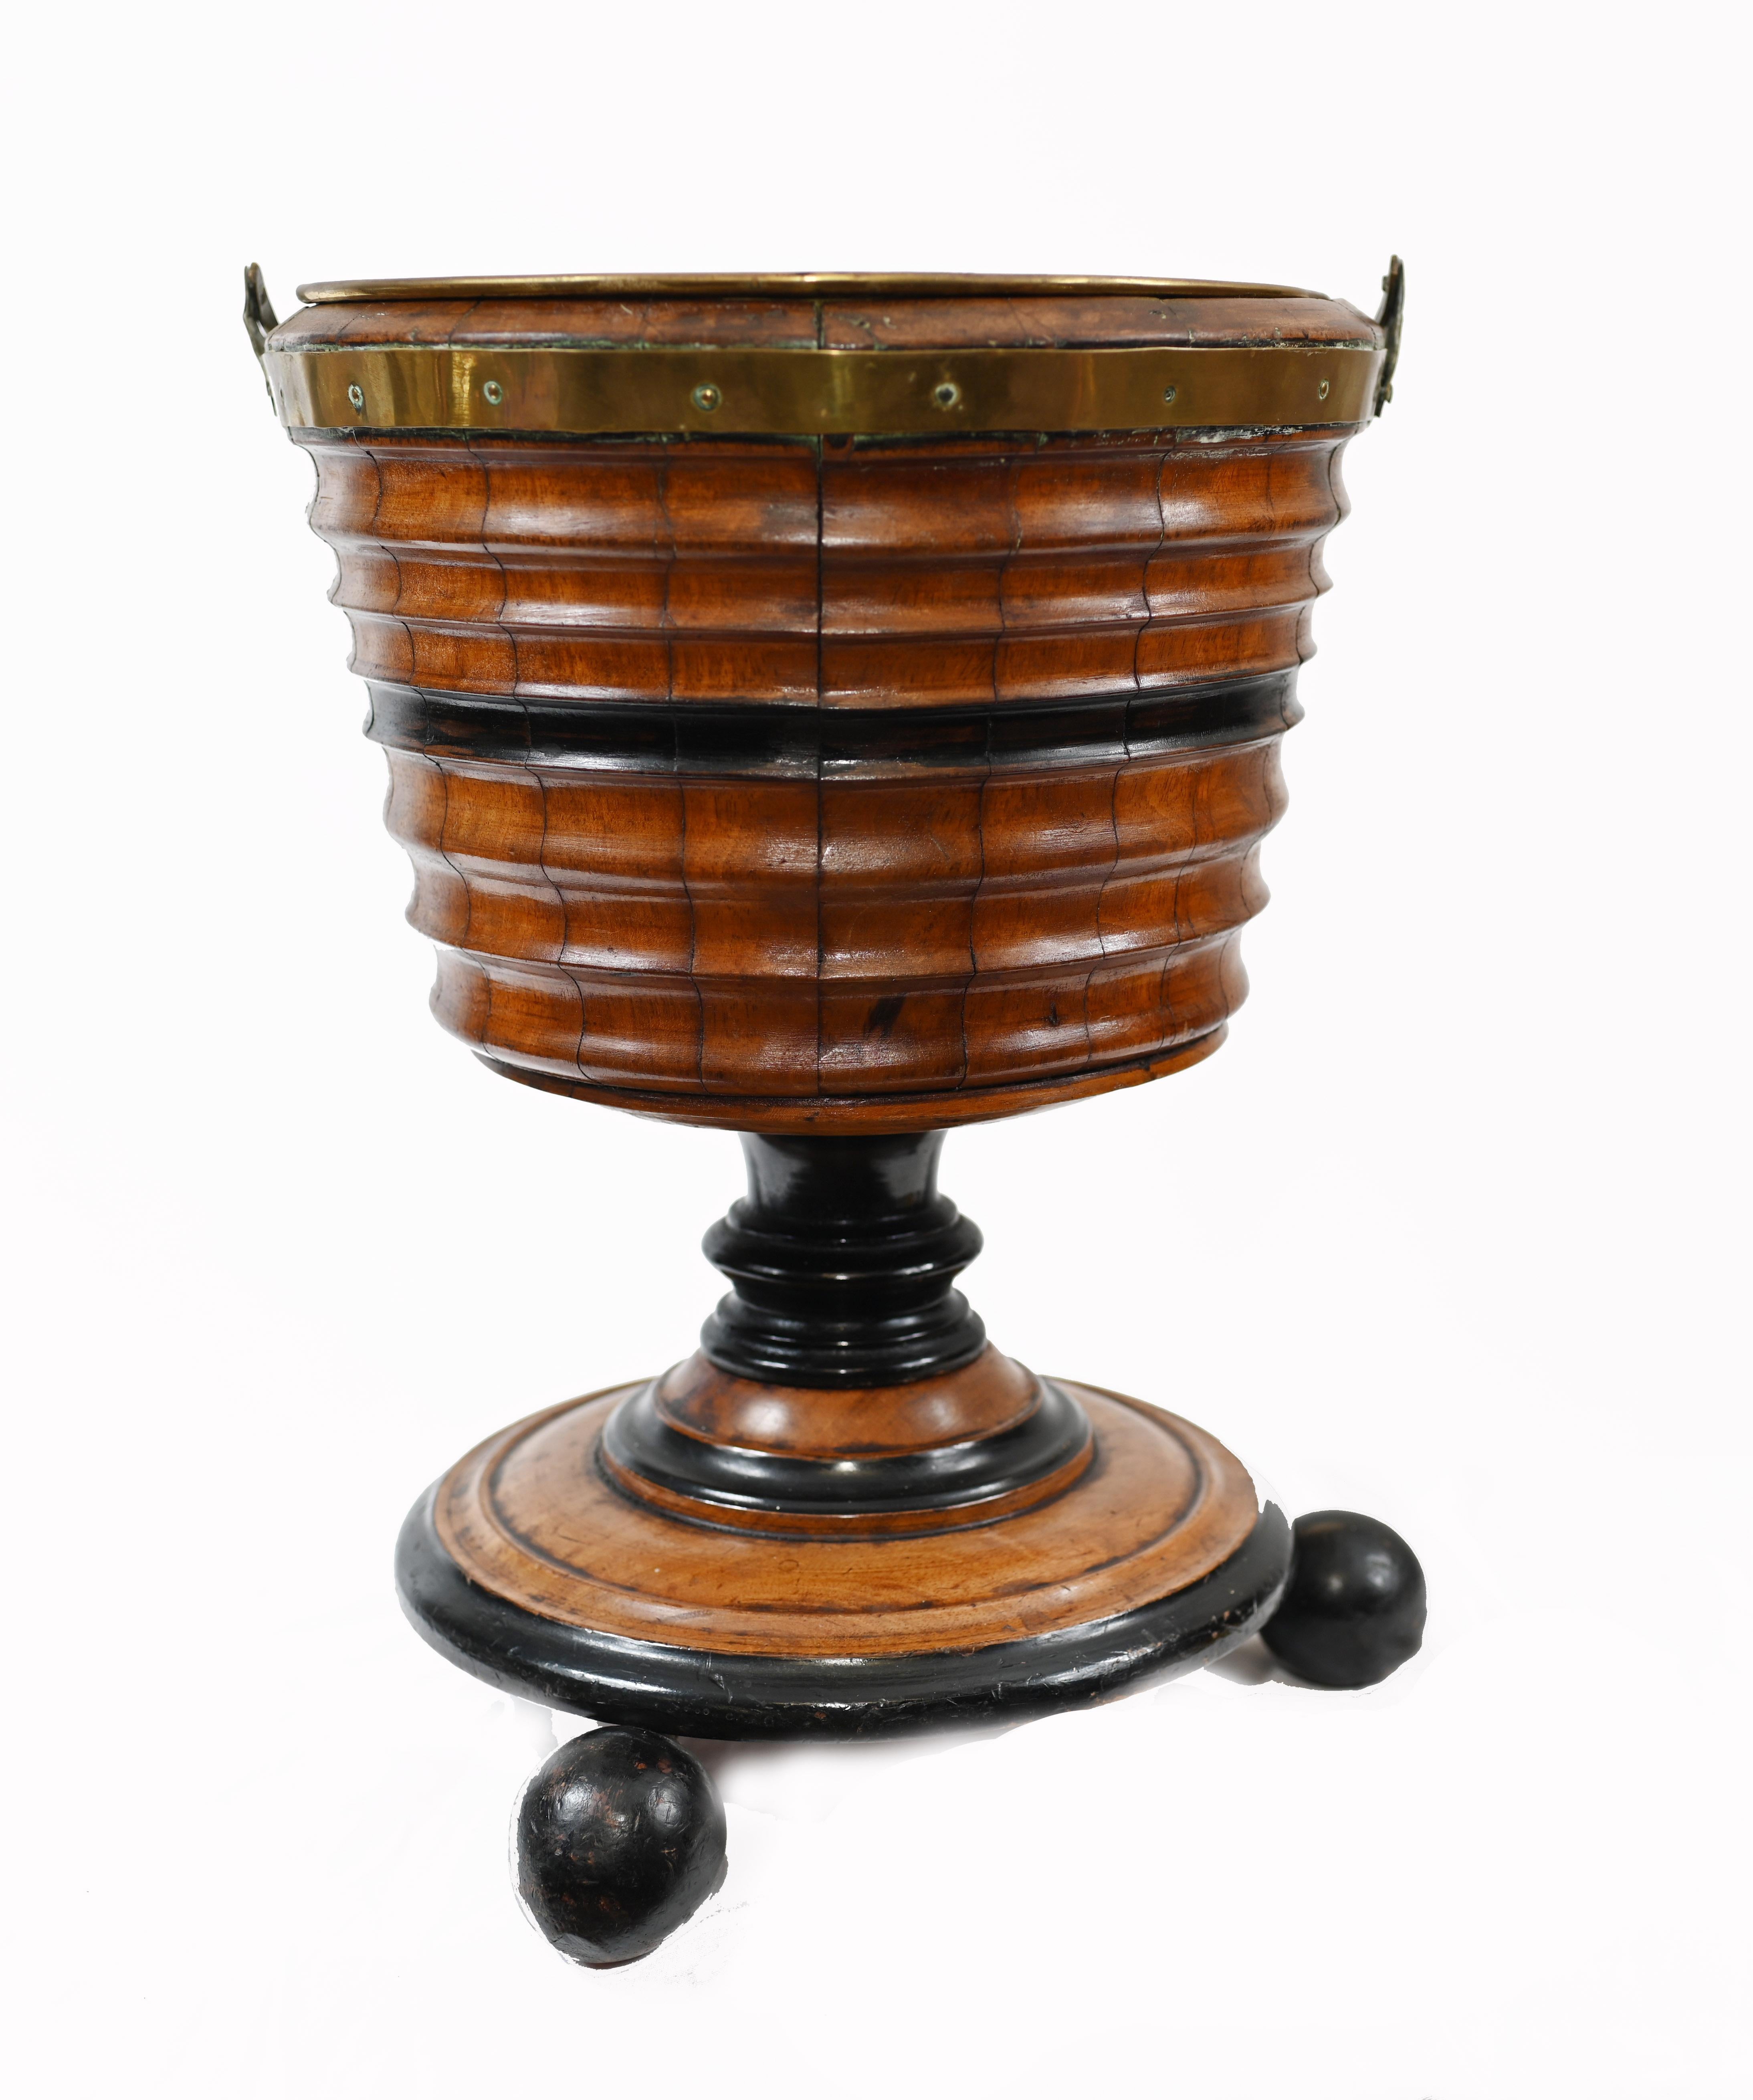 These buckets were originally used as braziers for holding charcoal and a tea-kettle
Crafted from moulded staves of ebony, walnut and holly and has original brass liner
We date this to circa 1880
Make for a great decorative piece or as a